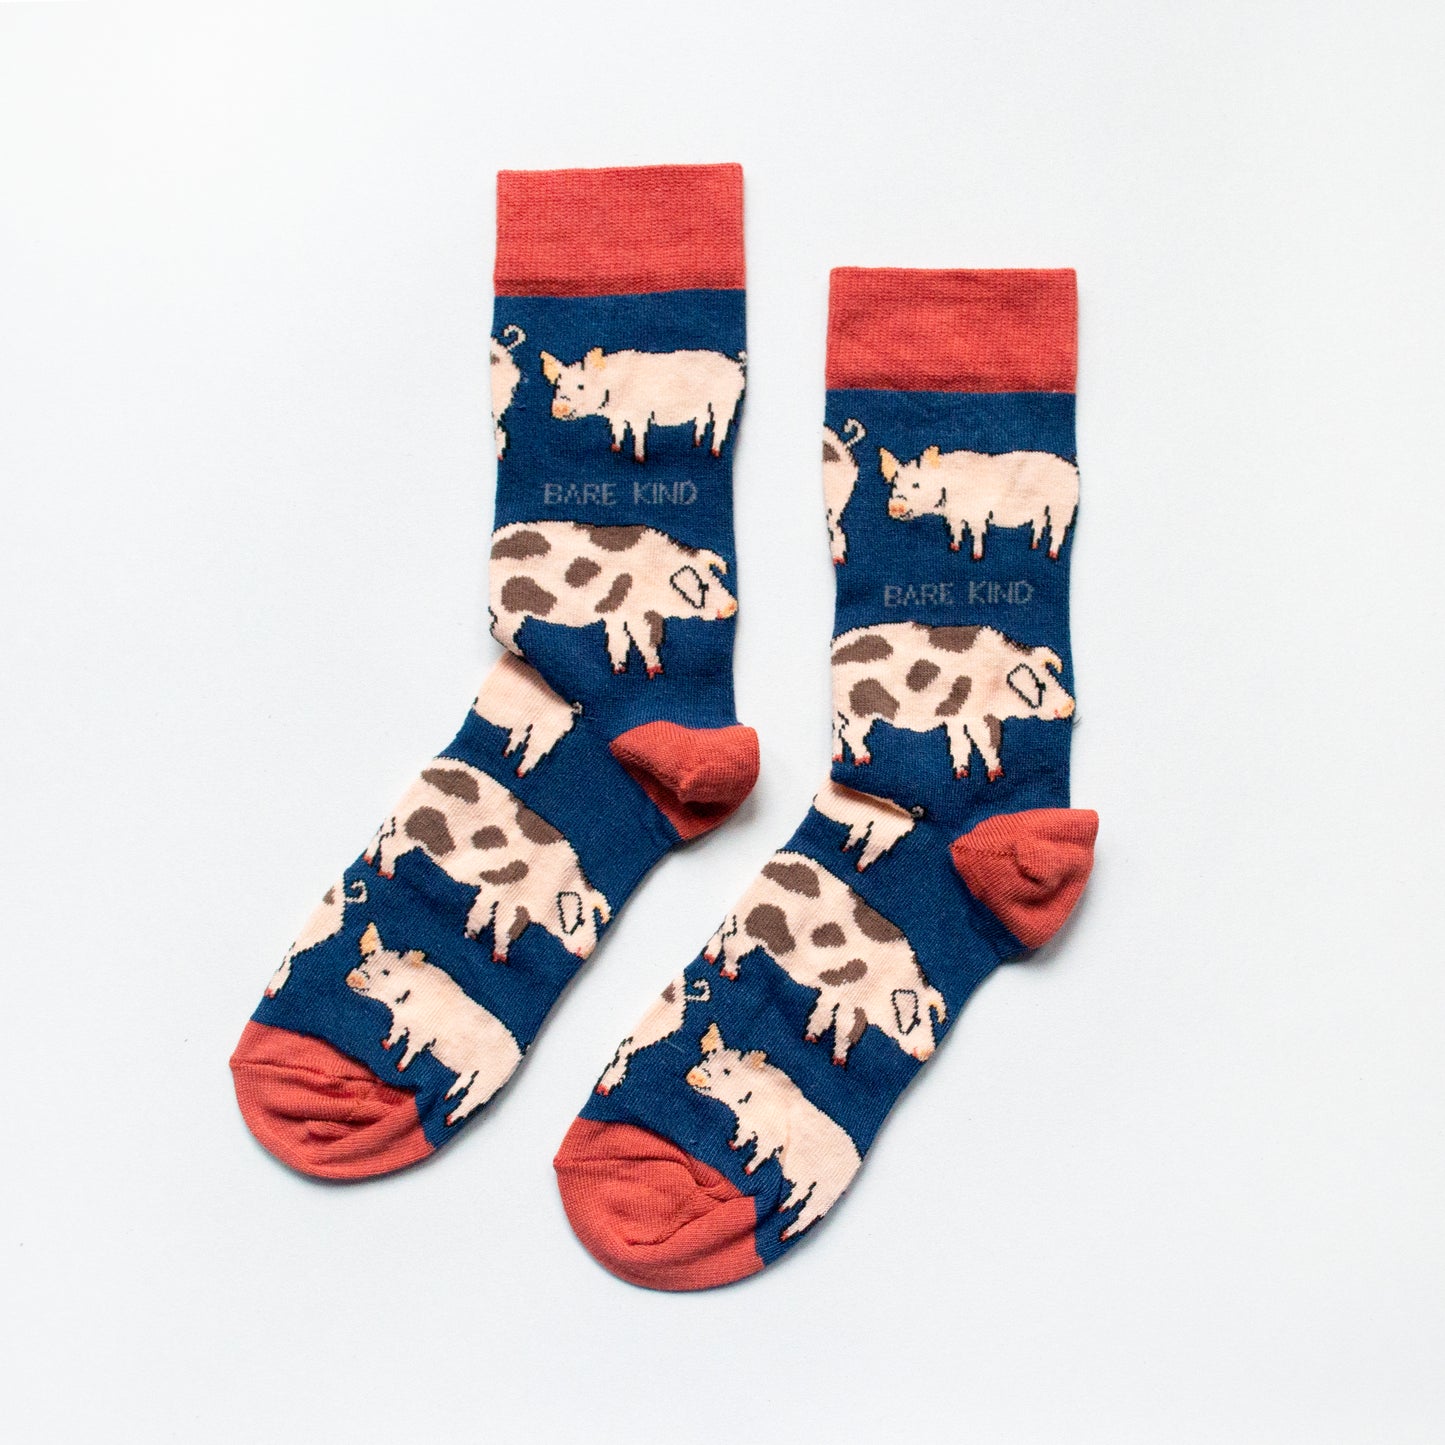 Bare Kind Bamboo Socks - Save the Pigs